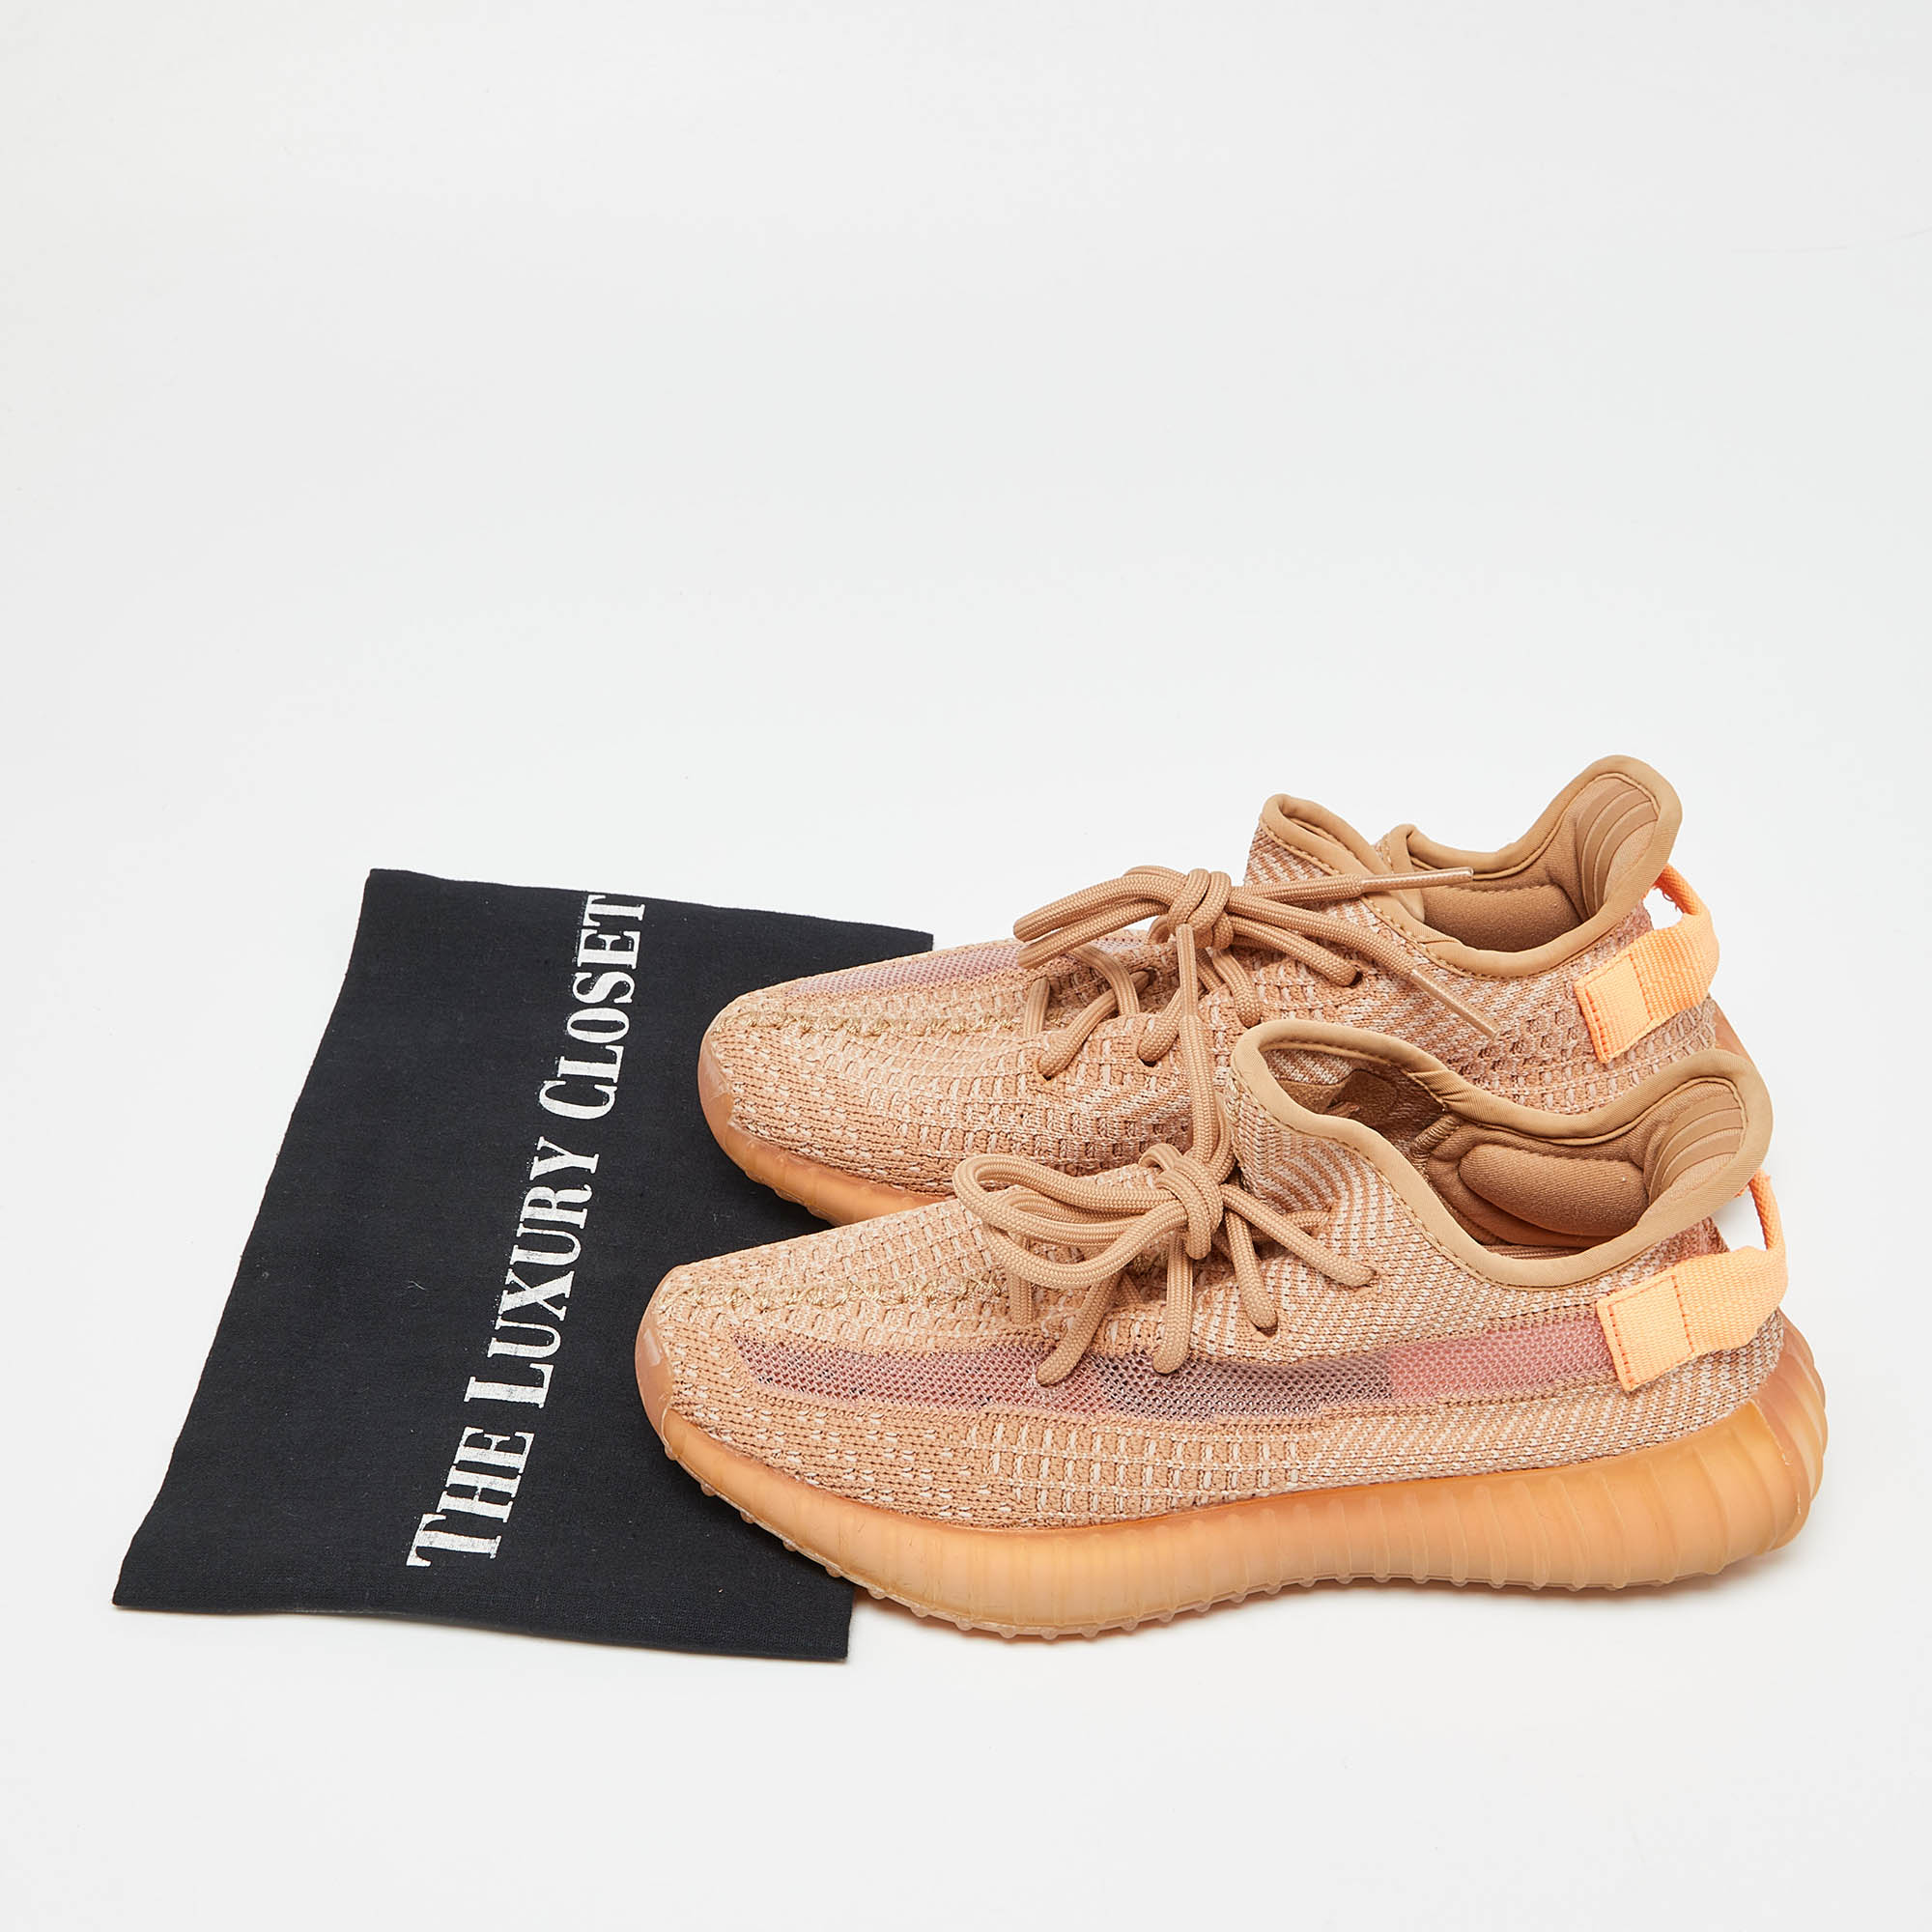 Yeezy X Adidas Orange Knit Fabric Boost 350 V2 Clay Sneakers Size 36 2/3